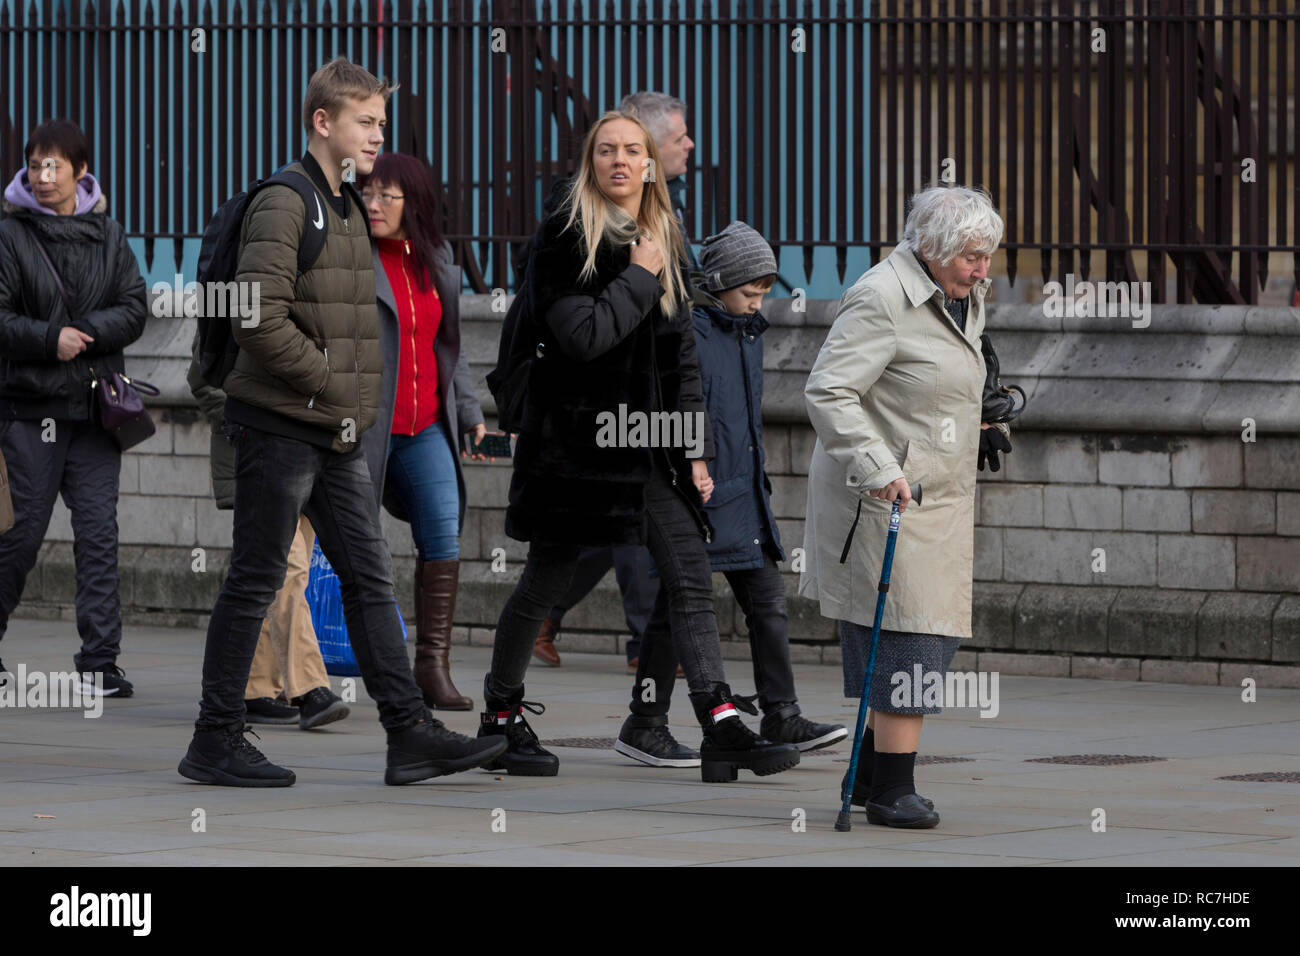 The veteran Liberal Democrat politician, Baroness Williams of Crosby, Shirley Williams, walks unnoticed by others with the aide of a walking stick towards the House of Lords, on 14th January 2019, in Westminster, London, England. Stock Photo